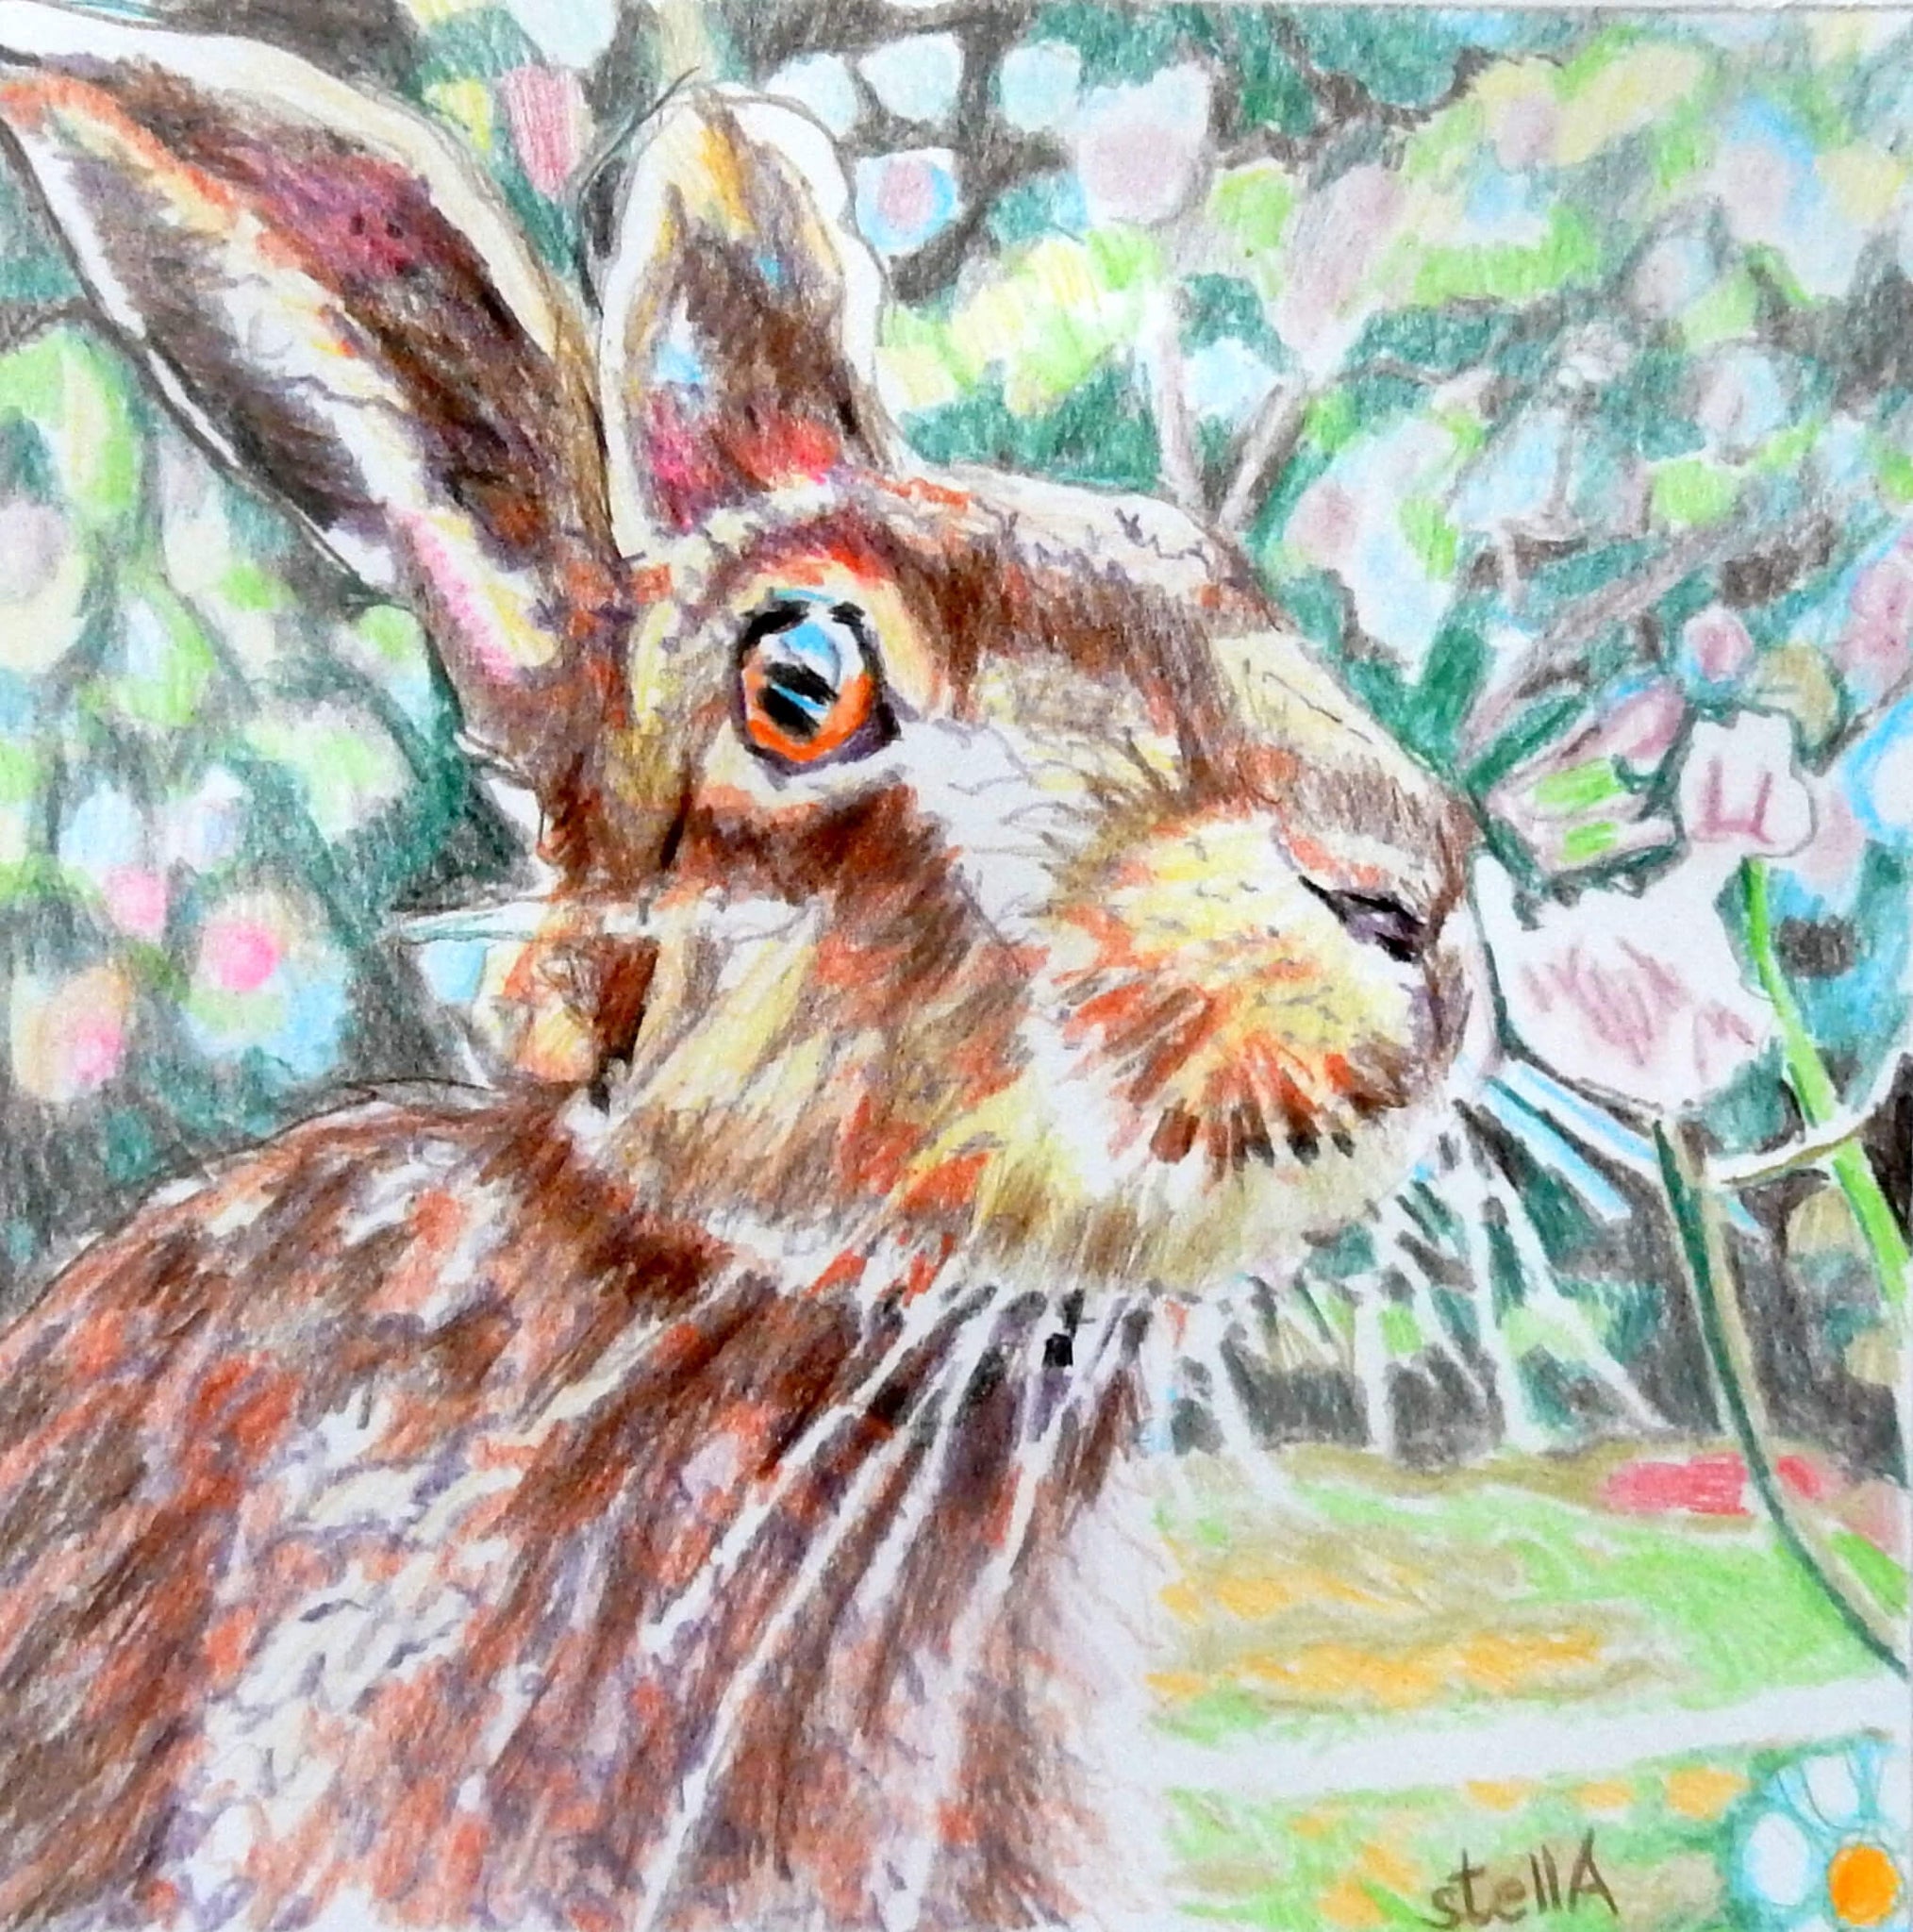 Harry hare pencil on paper animal portrait artwork by Stella Tooth.